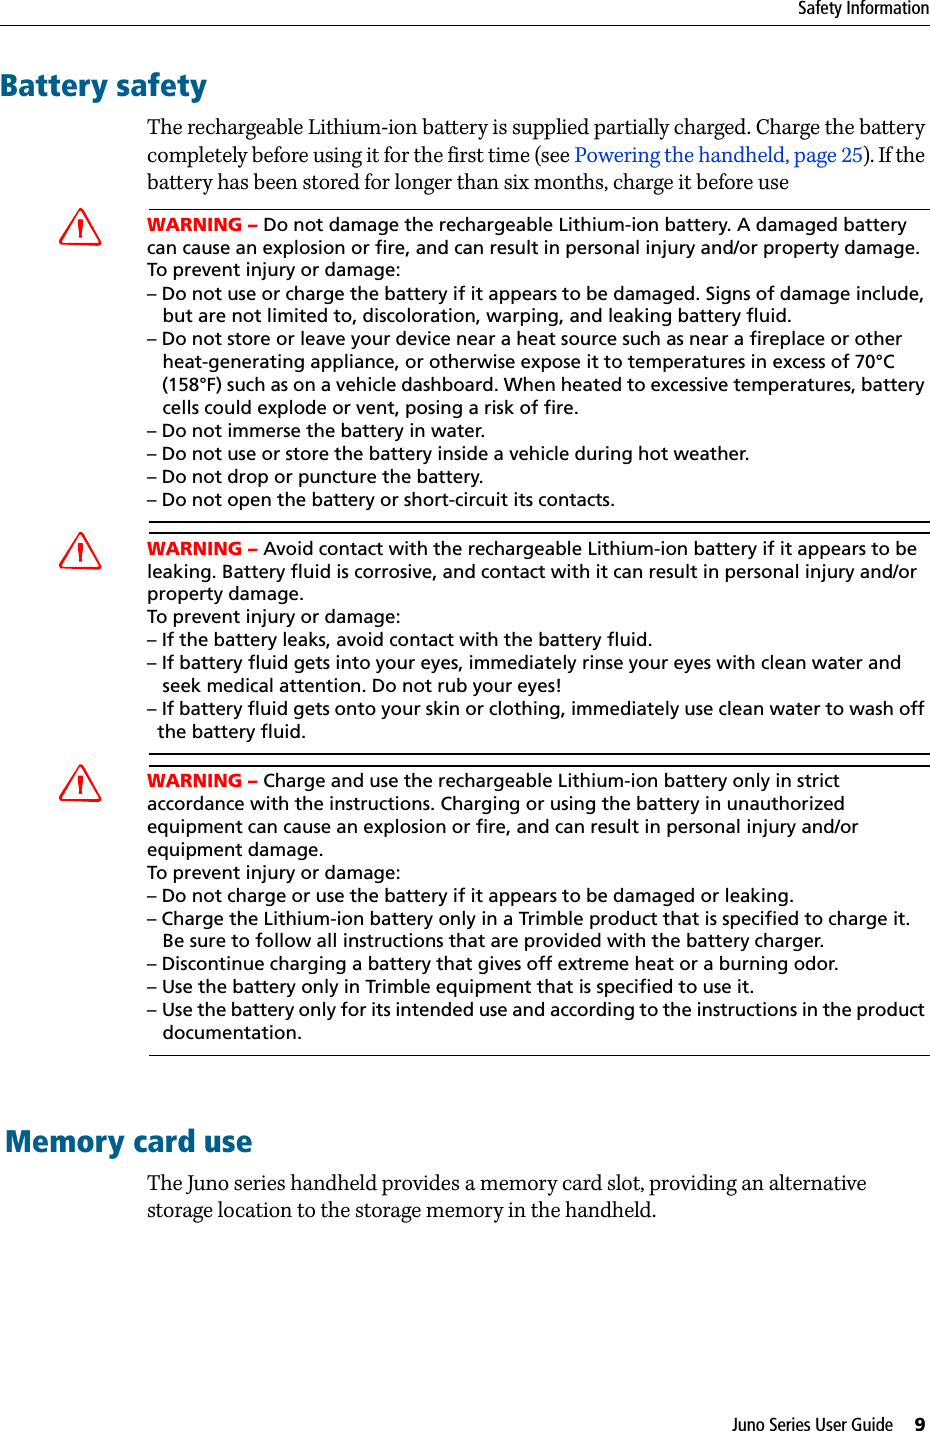 Juno Series User Guide     9Safety InformationBattery safetyThe rechargeable Lithium-ion battery is supplied partially charged. Charge the battery completely before using it for the first time (see Powering the handheld, page 25). If the battery has been stored for longer than six months, charge it before useCWARNING – Do not damage the rechargeable Lithium-ion battery. A damaged battery can cause an explosion or fire, and can result in personal injury and/or property damage. To prevent injury or damage: – Do not use or charge the battery if it appears to be damaged. Signs of damage include,    but are not limited to, discoloration, warping, and leaking battery fluid.– Do not store or leave your device near a heat source such as near a fireplace or other    heat-generating appliance, or otherwise expose it to temperatures in excess of 70°C    (158°F) such as on a vehicle dashboard. When heated to excessive temperatures, battery    cells could explode or vent, posing a risk of fire. – Do not immerse the battery in water. – Do not use or store the battery inside a vehicle during hot weather. – Do not drop or puncture the battery. – Do not open the battery or short-circuit its contacts.CWARNING – Avoid contact with the rechargeable Lithium-ion battery if it appears to be leaking. Battery fluid is corrosive, and contact with it can result in personal injury and/or property damage.To prevent injury or damage:– If the battery leaks, avoid contact with the battery fluid. – If battery fluid gets into your eyes, immediately rinse your eyes with clean water and    seek medical attention. Do not rub your eyes! – If battery fluid gets onto your skin or clothing, immediately use clean water to wash off   the battery fluid.CWARNING – Charge and use the rechargeable Lithium-ion battery only in strict accordance with the instructions. Charging or using the battery in unauthorized equipment can cause an explosion or fire, and can result in personal injury and/or equipment damage. To prevent injury or damage: – Do not charge or use the battery if it appears to be damaged or leaking.– Charge the Lithium-ion battery only in a Trimble product that is specified to charge it.    Be sure to follow all instructions that are provided with the battery charger. – Discontinue charging a battery that gives off extreme heat or a burning odor.– Use the battery only in Trimble equipment that is specified to use it. – Use the battery only for its intended use and according to the instructions in the product    documentation.Memory card useThe Juno series handheld provides a memory card slot, providing an alternative storage location to the storage memory in the handheld.